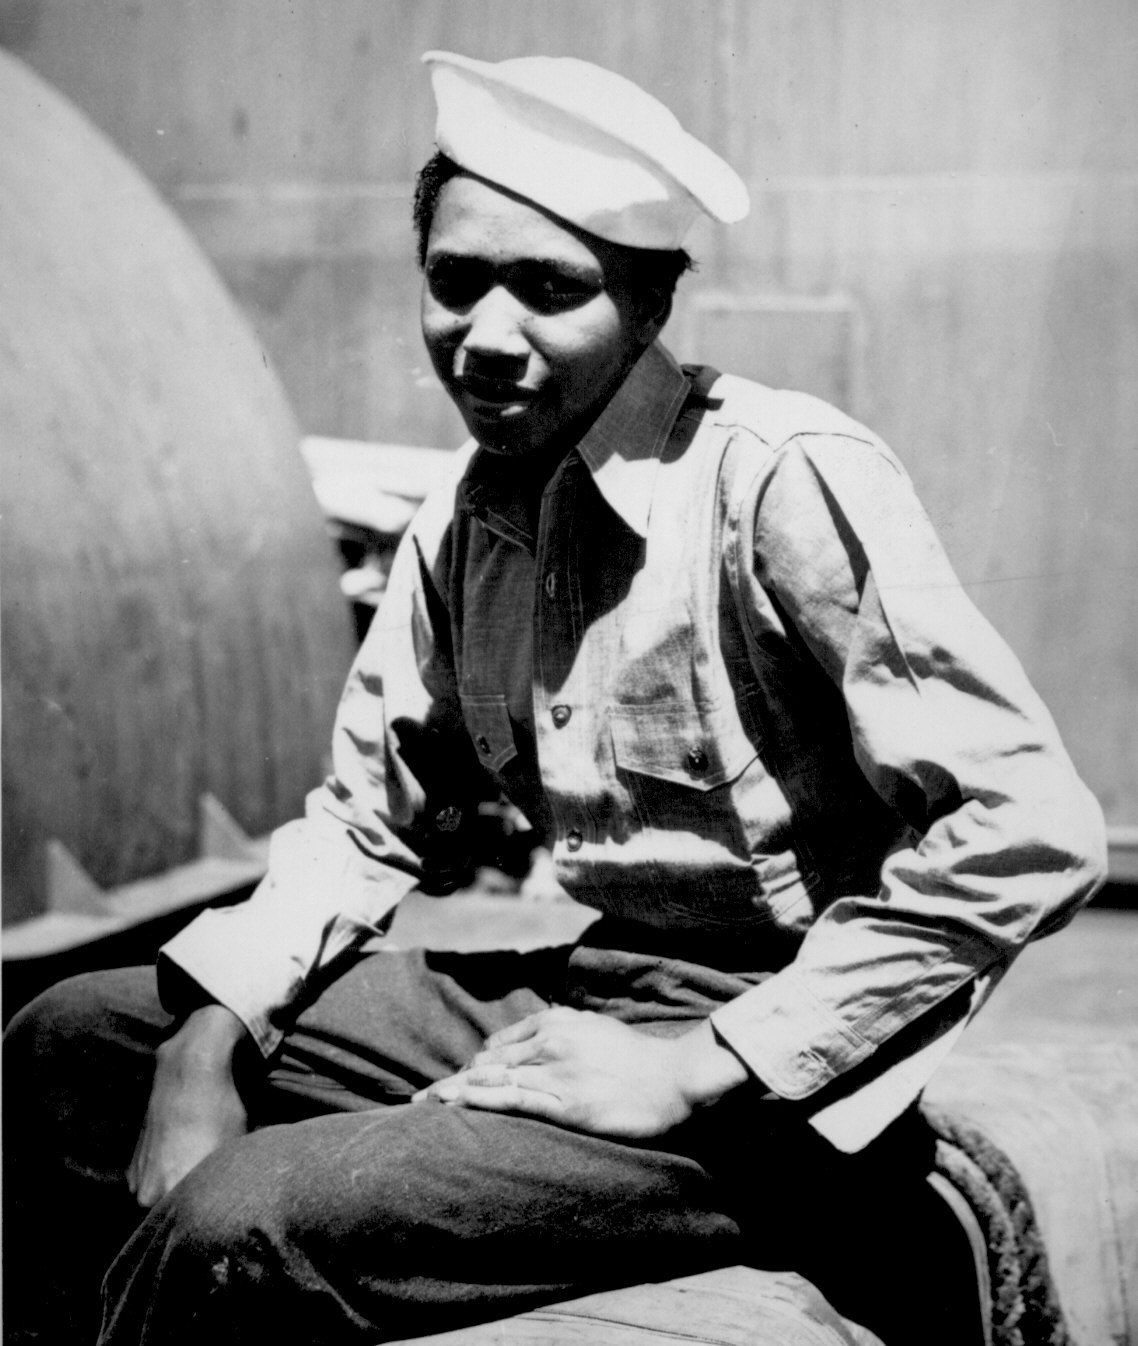 African-American US Coast Guardsman Aught Guttery, Jr., Steward's Mate 1st Class, on a ship off Guam, Mariana Islands, circa mid- or late-1944